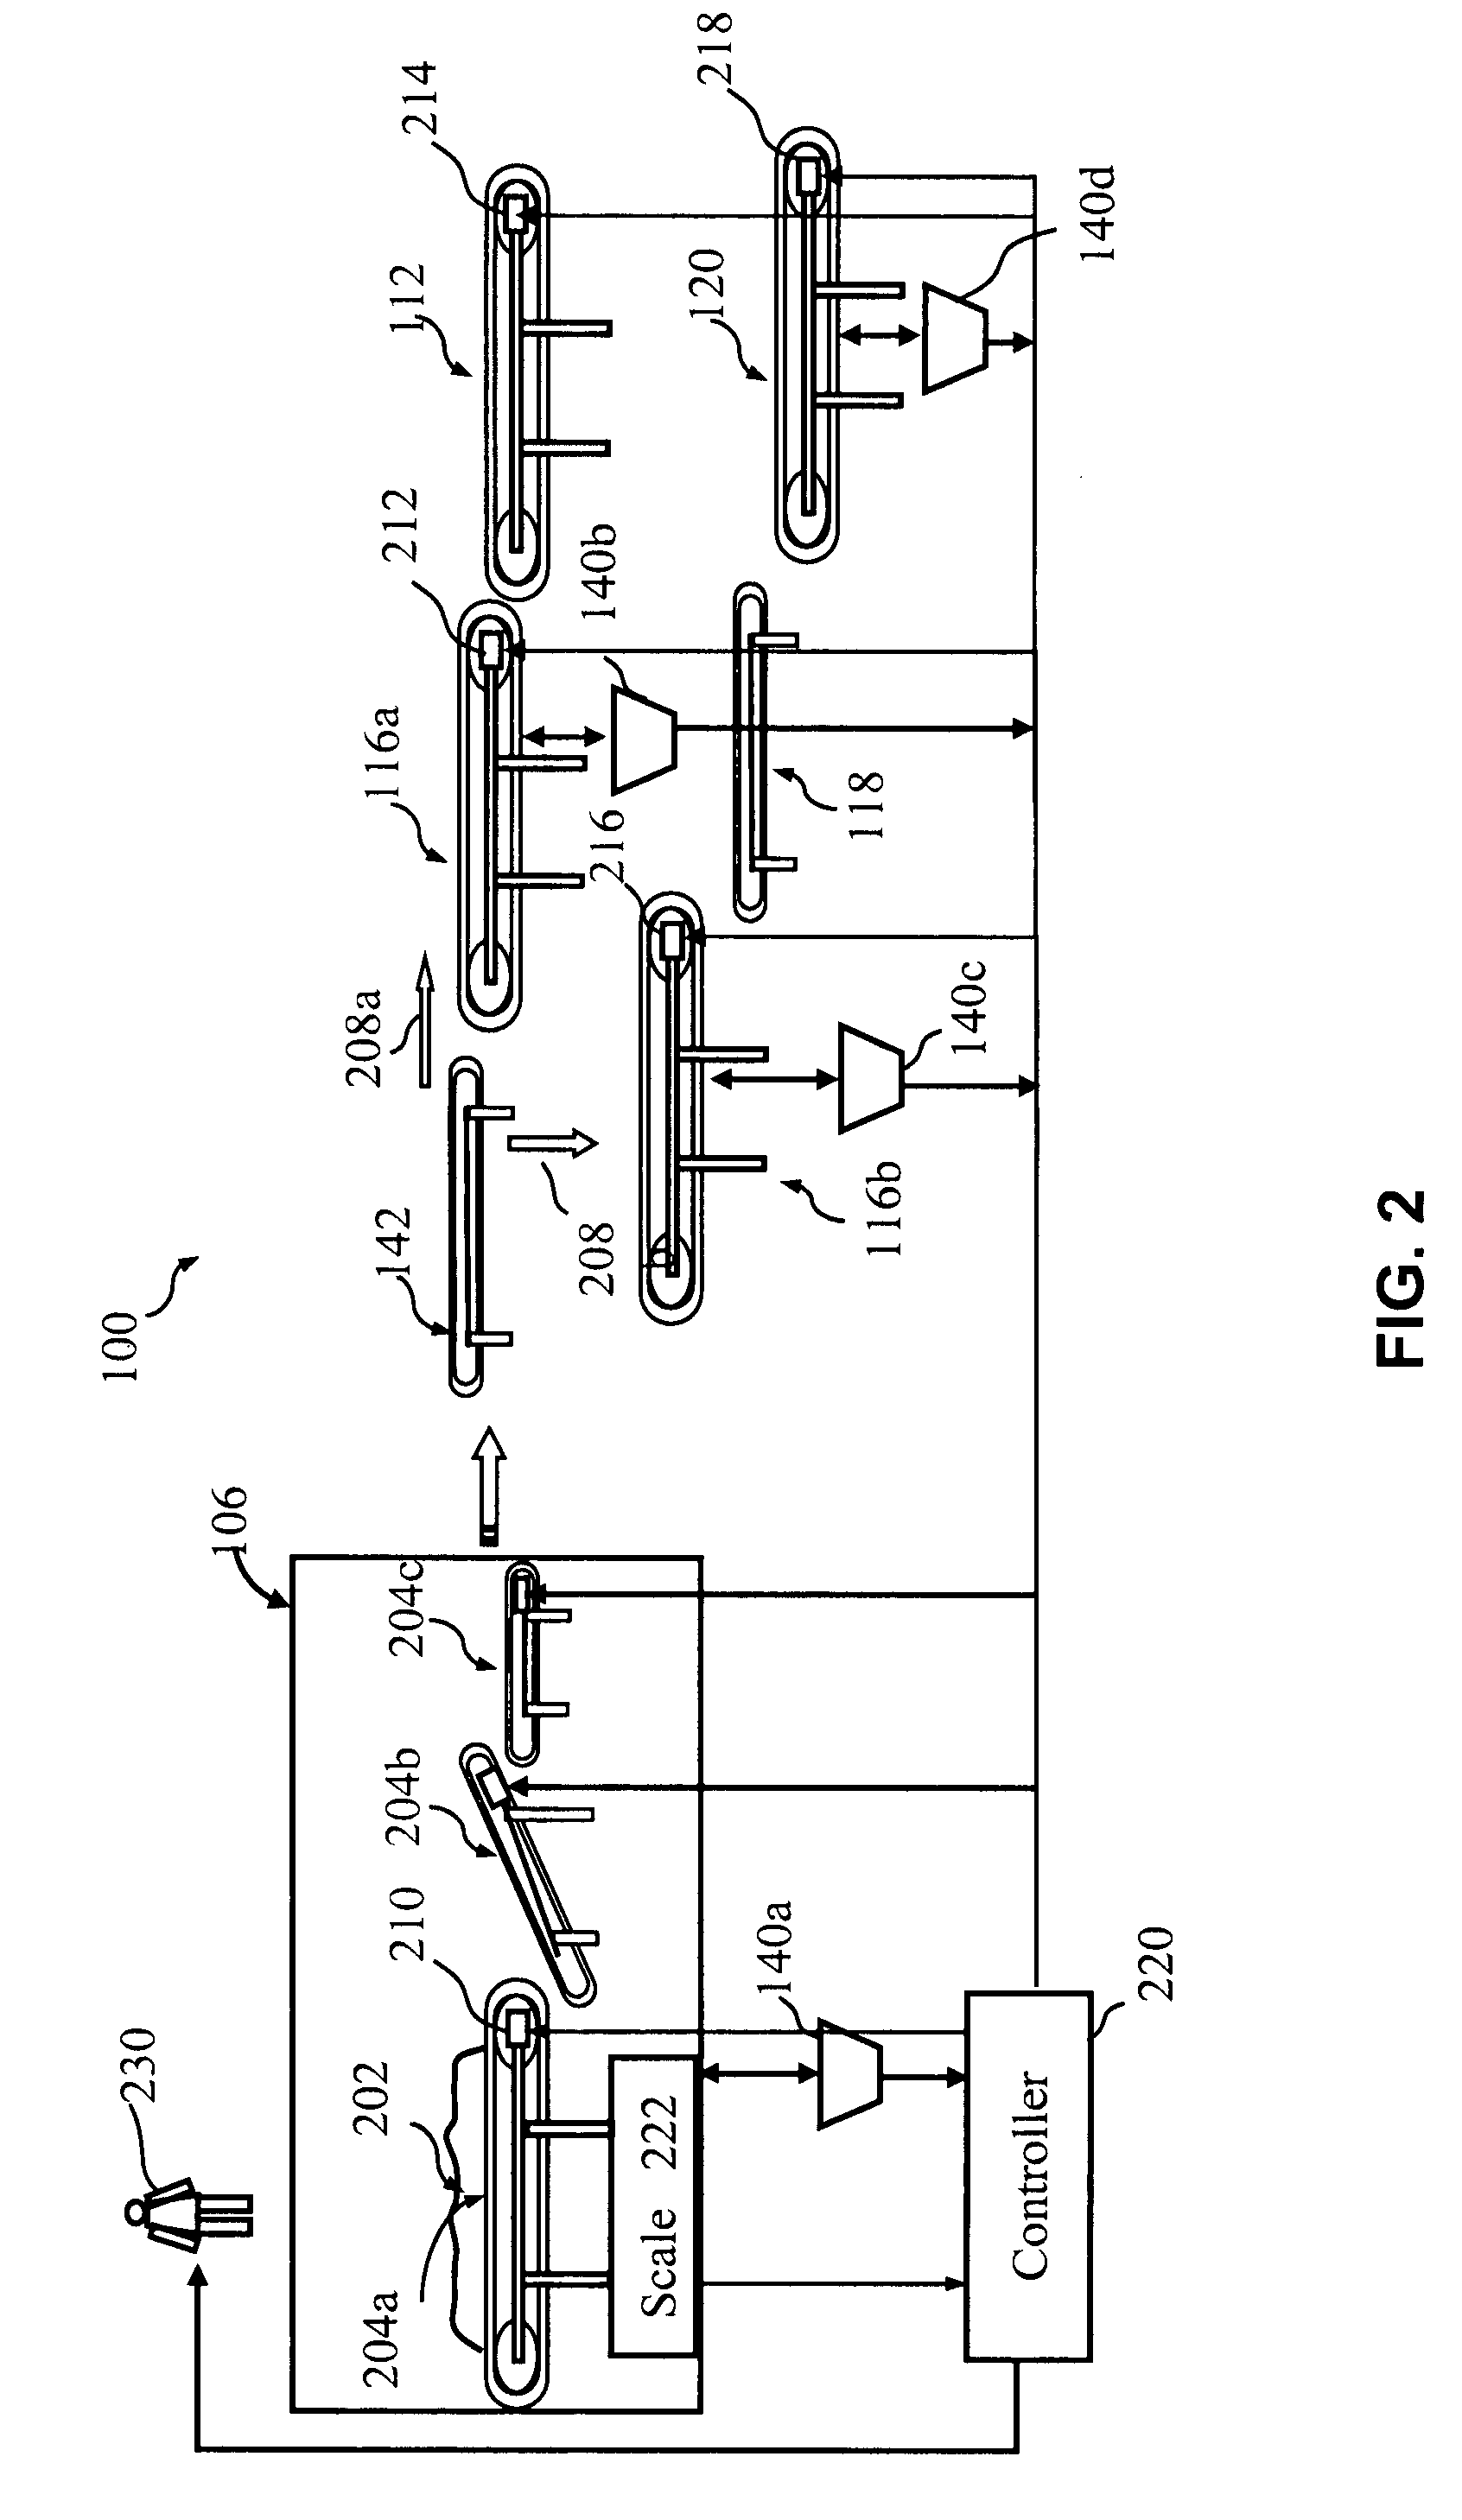 Systems and methods for optimizing a single-stream materials recovery facility